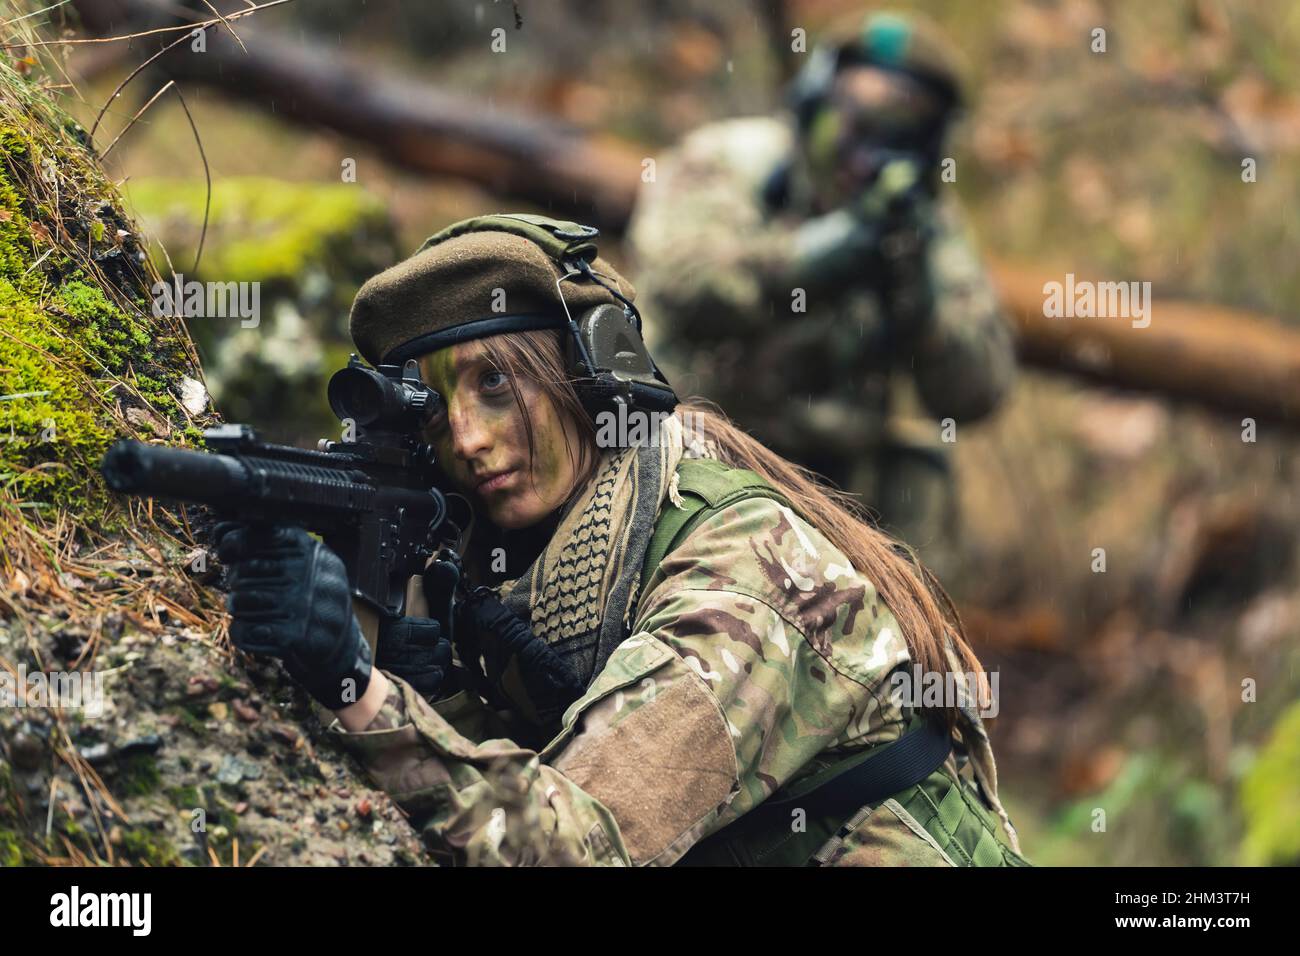 Resilient colonel tough women heroes aiming to protect Stock Photo